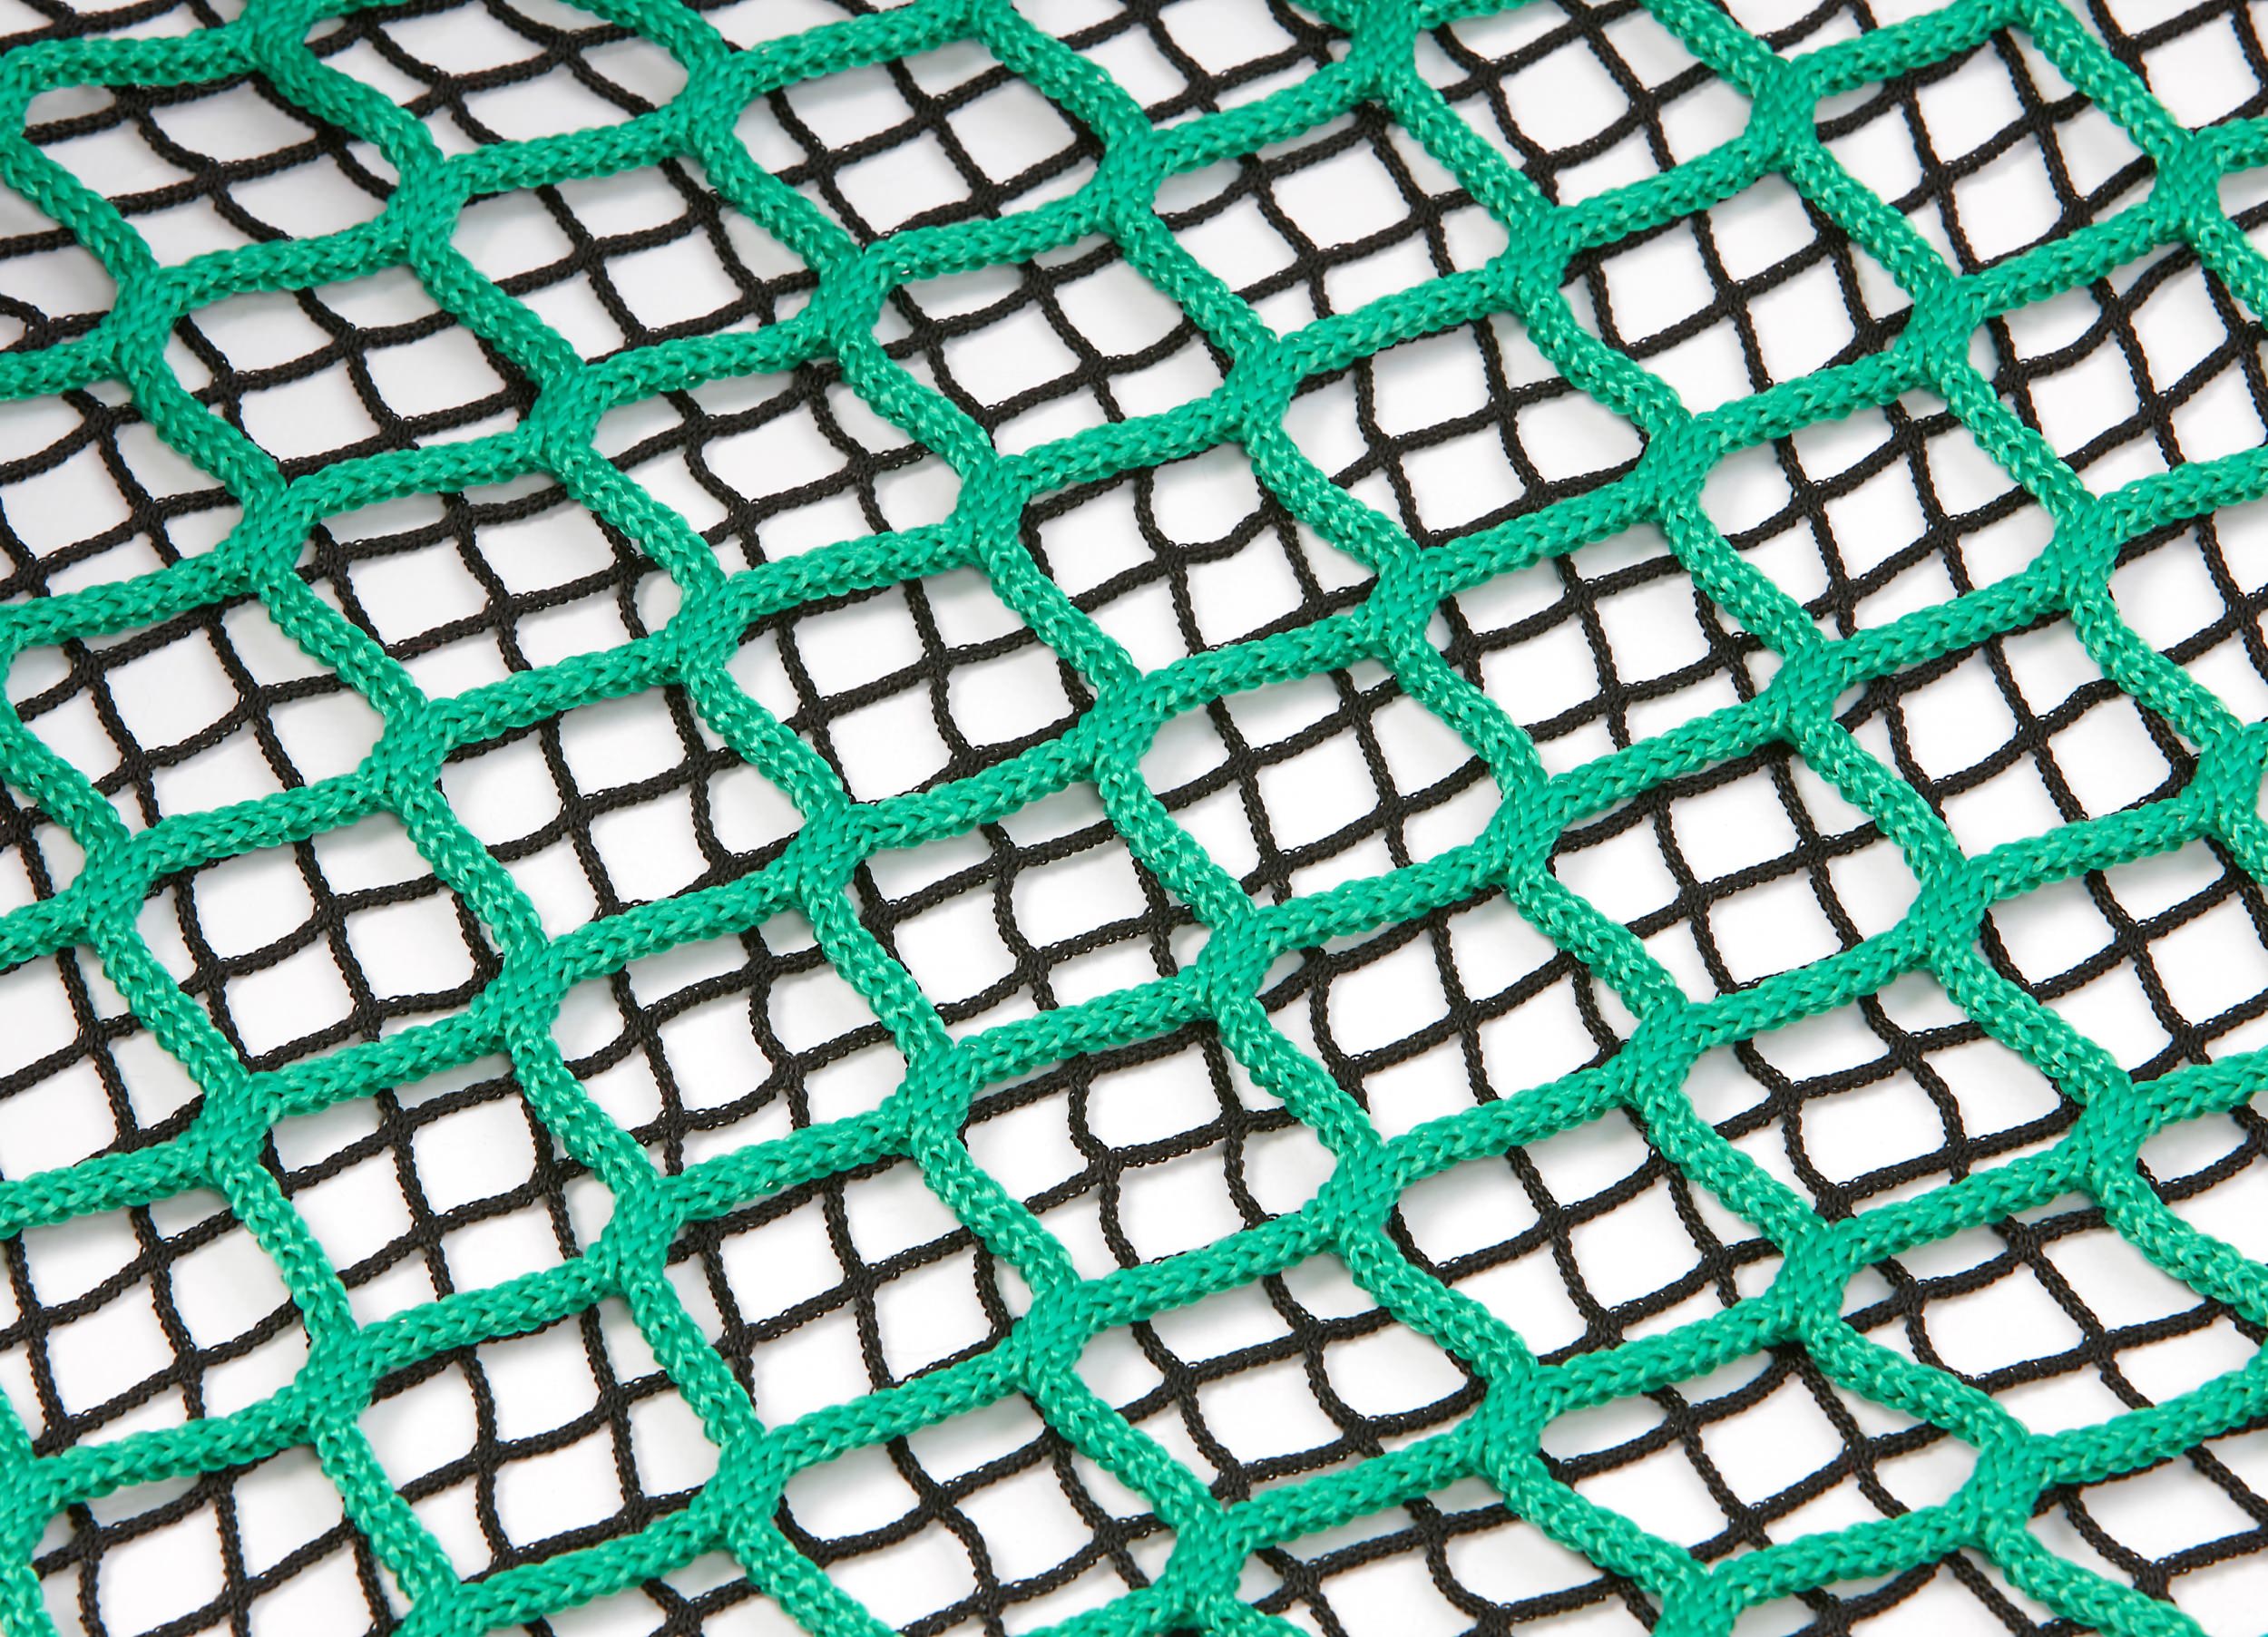 Safety Net with Overlay Net (45 mm Mesh) | Safetynet365